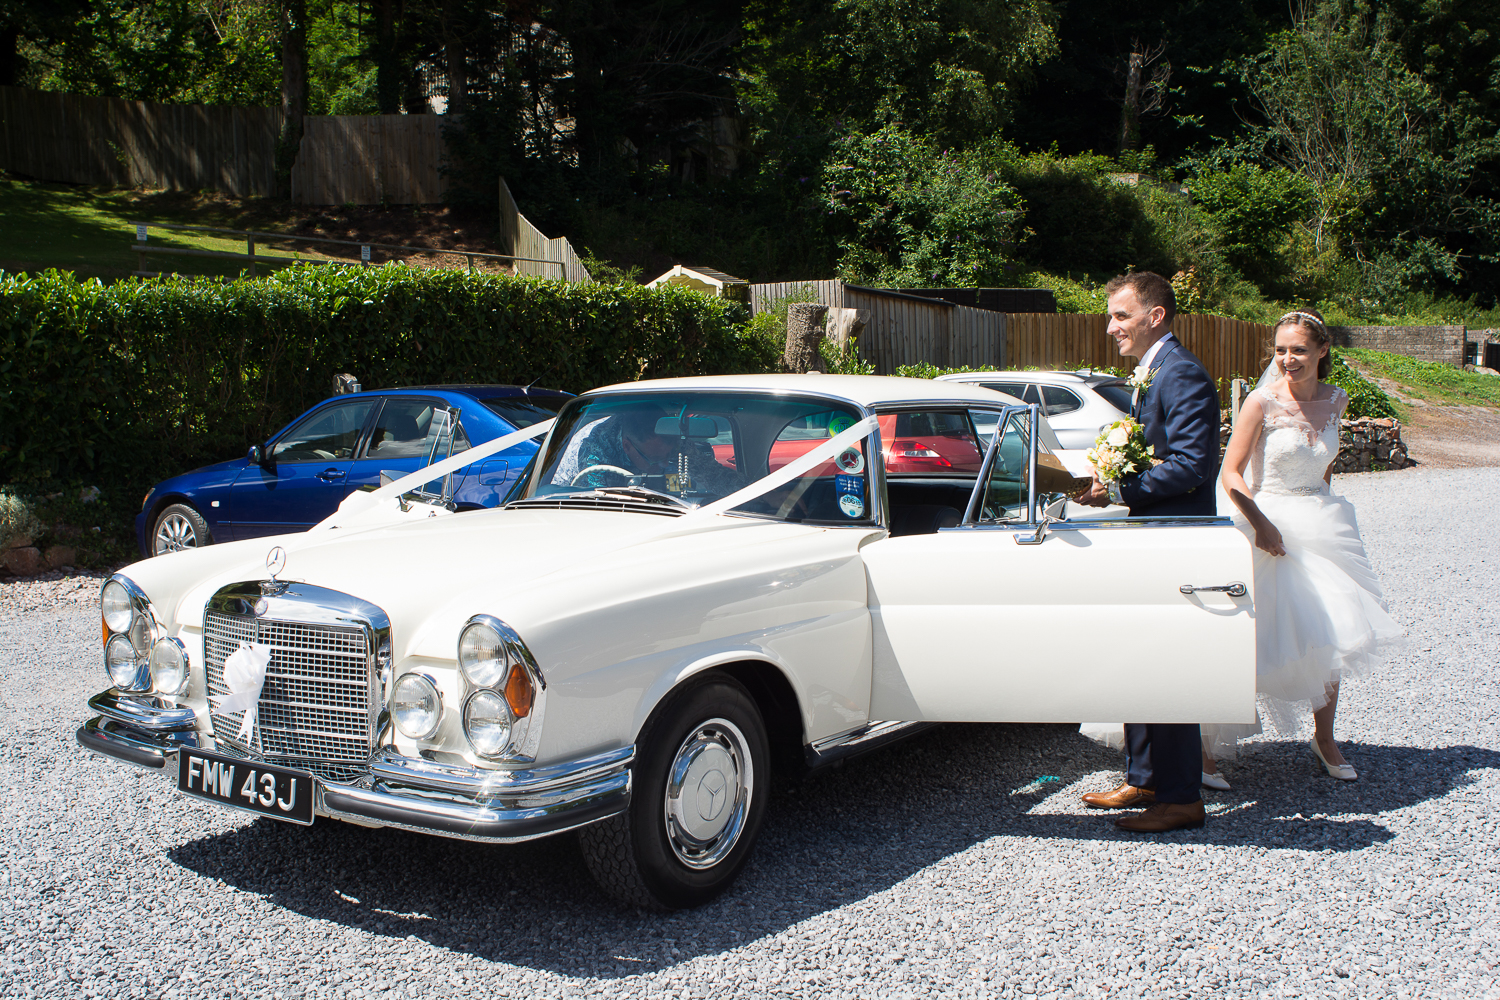 Bride and Groom arriving in style at the Bickley Mill wedding venue in Devon